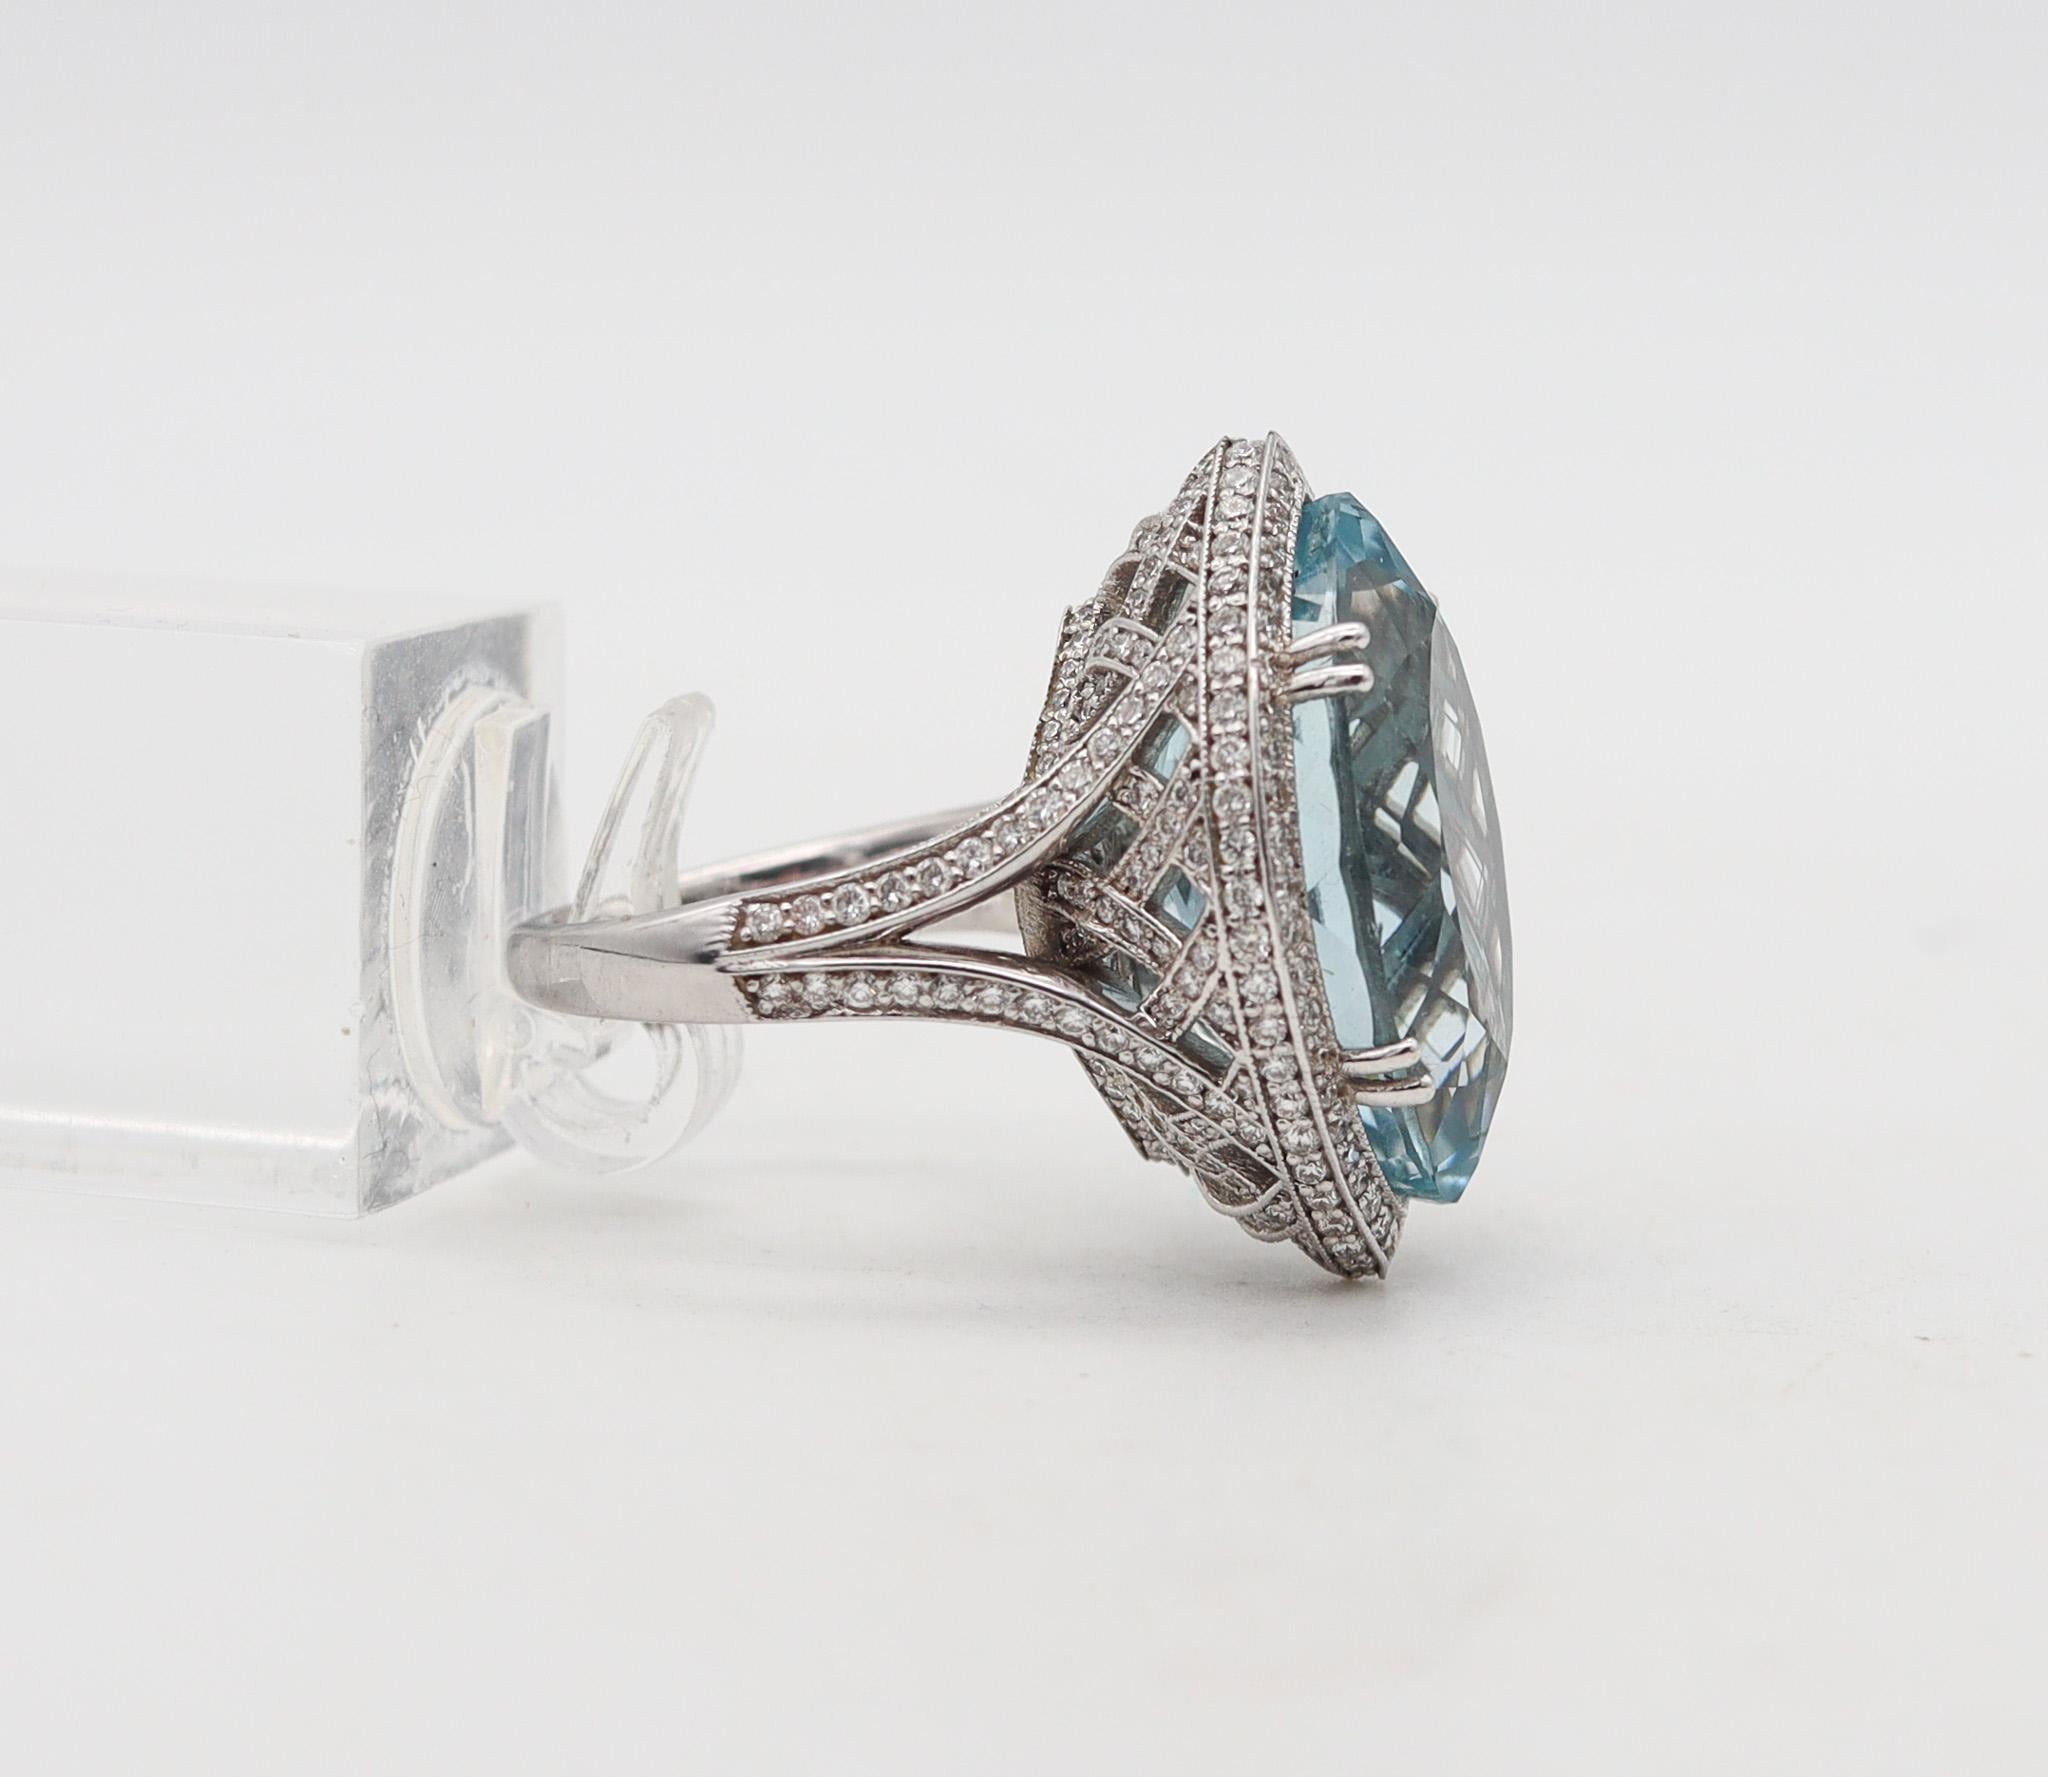 Art Deco Fred Leighton Cocktail Ring 18Kt Gold With 26.77 Ctw In Diamonds And Aquamarine For Sale